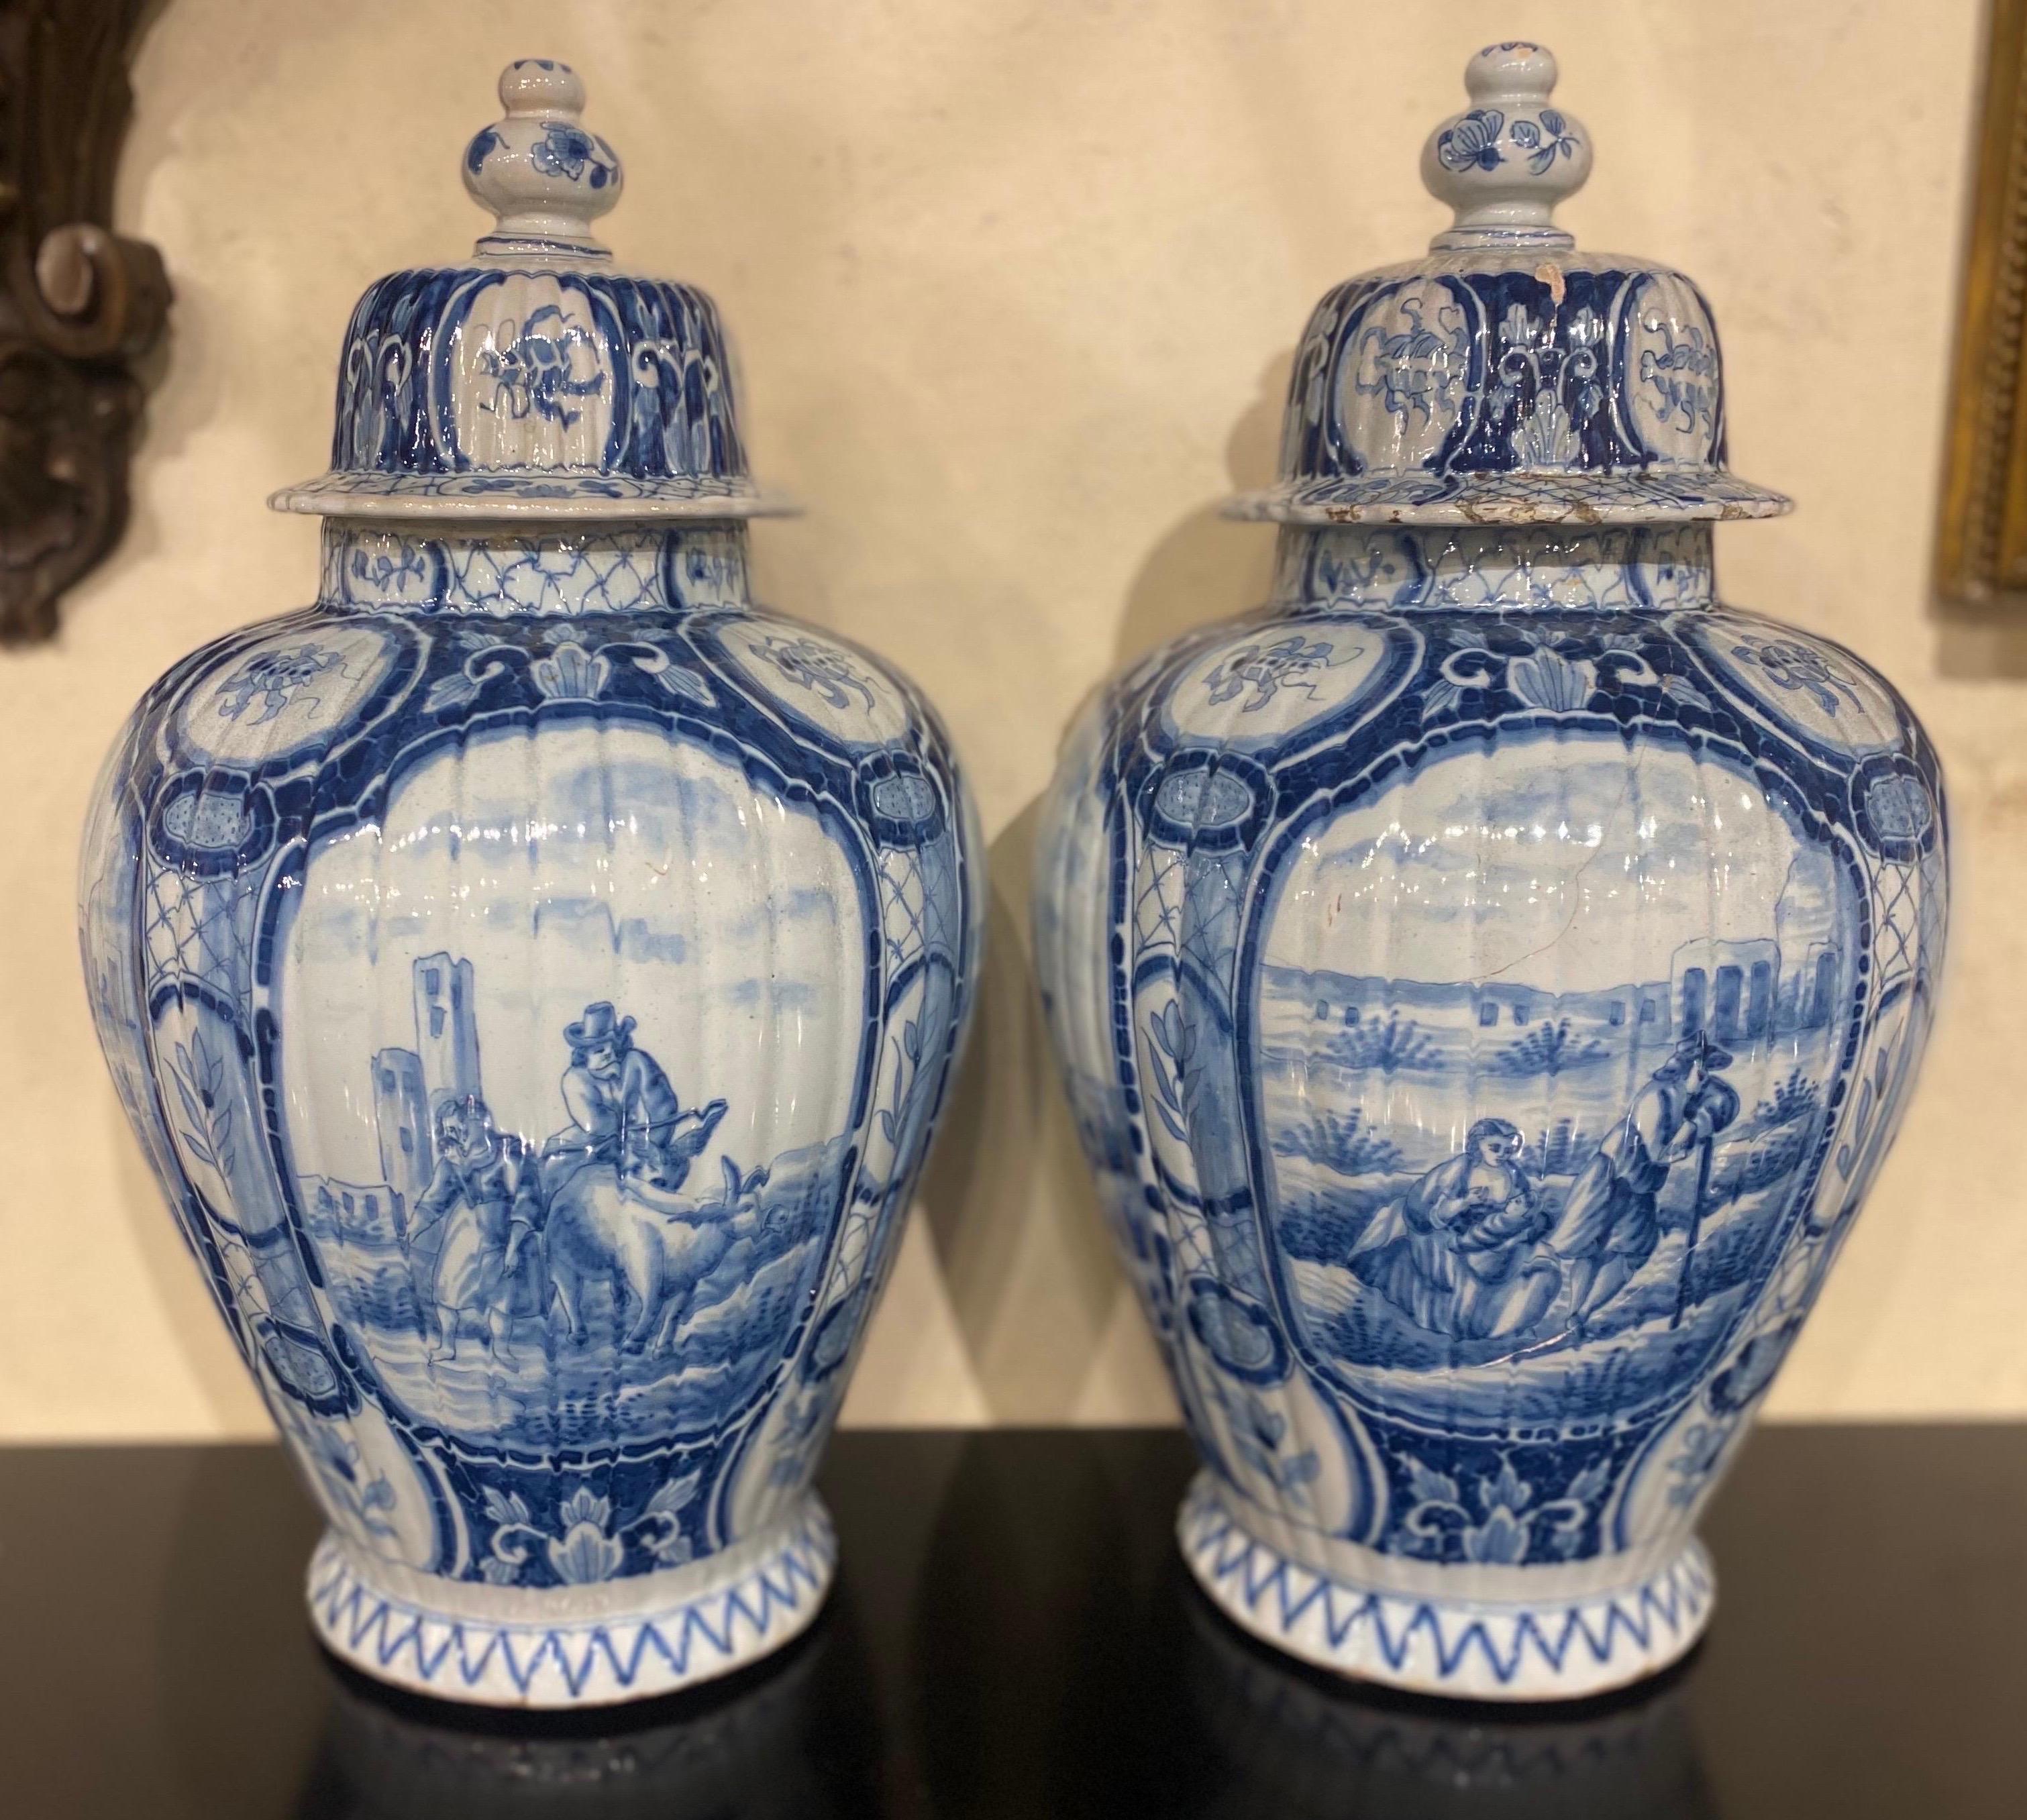 Large Pair of 18th Century Dutch Delft Jars with Lids 4